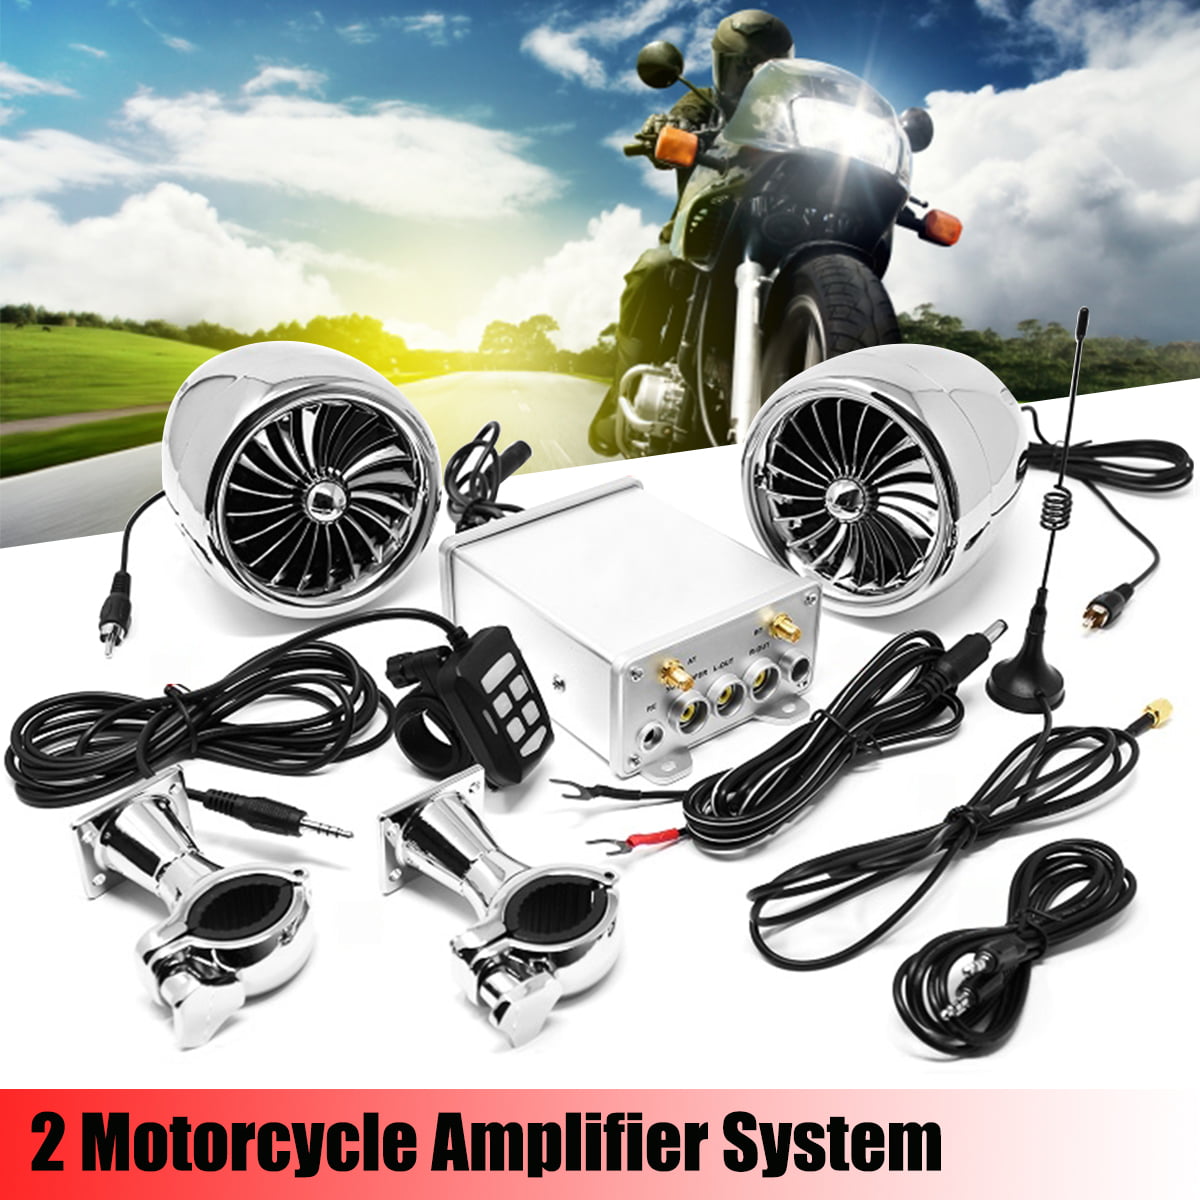 1200W AMP Bluetooth Waterproof Motorcycle Stereo 4 Speaker Audio MP3 System AUX 